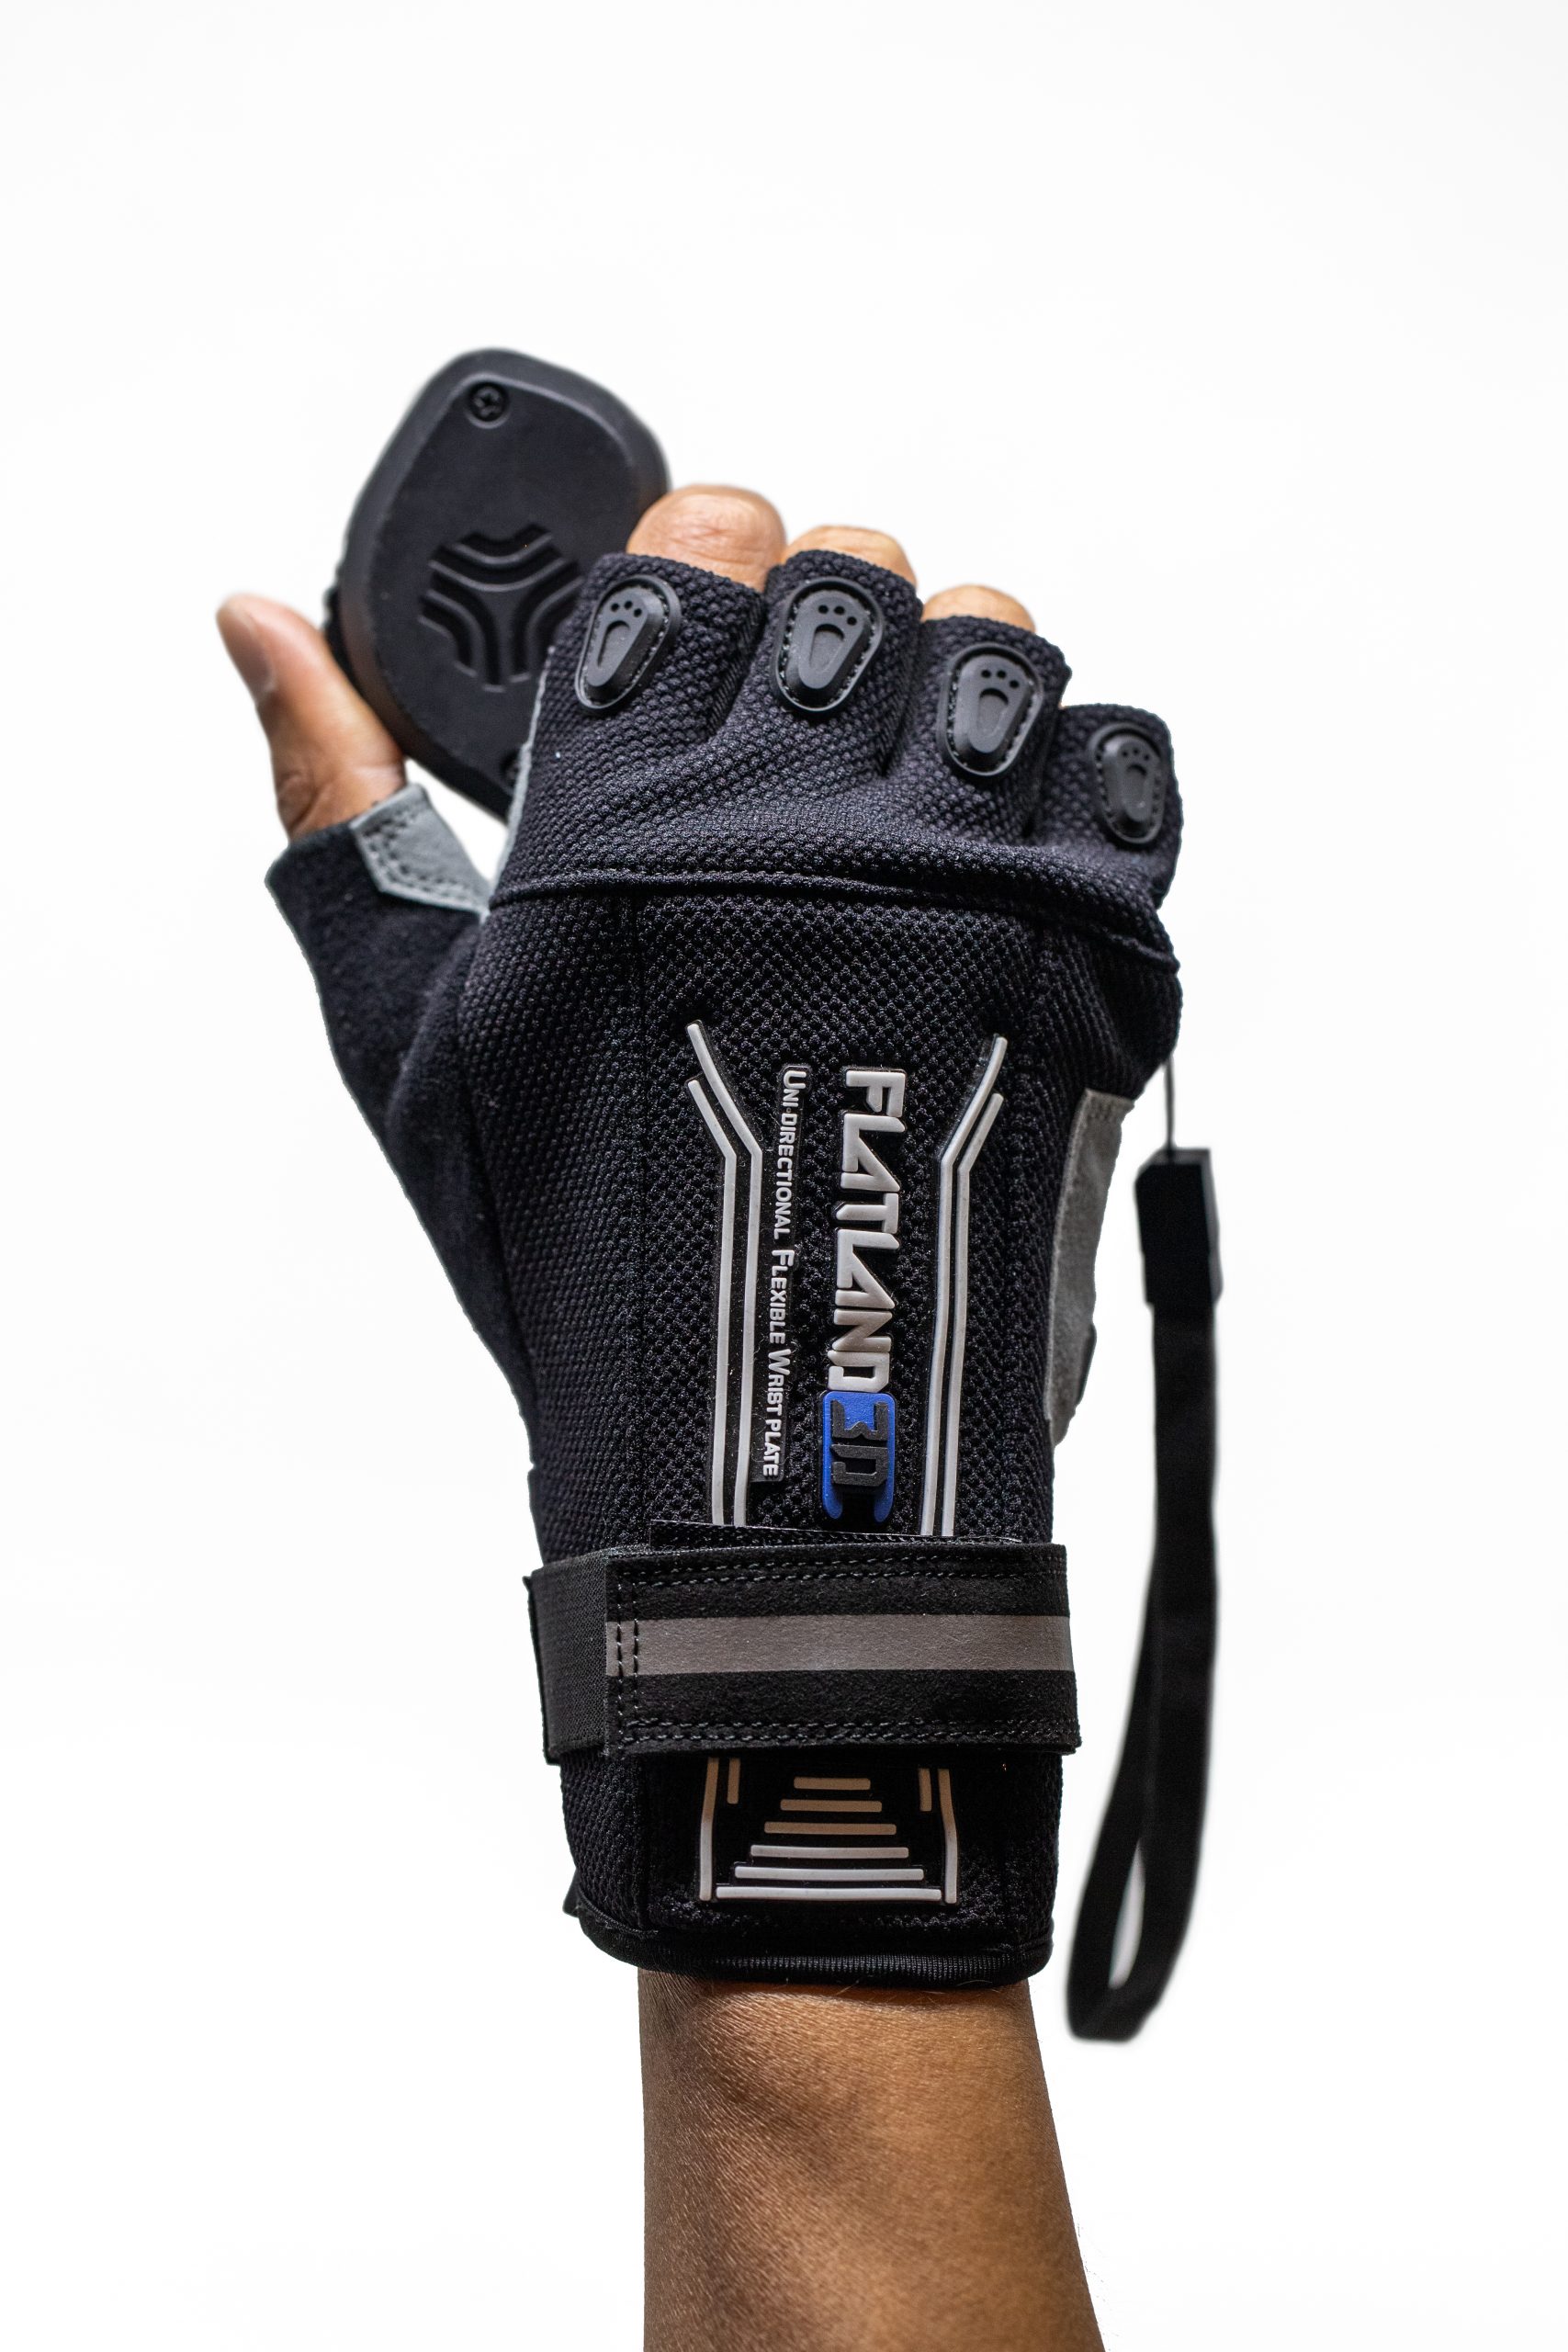 Pro Fingerless Gloves 9864-23 XL Knuckle Protection